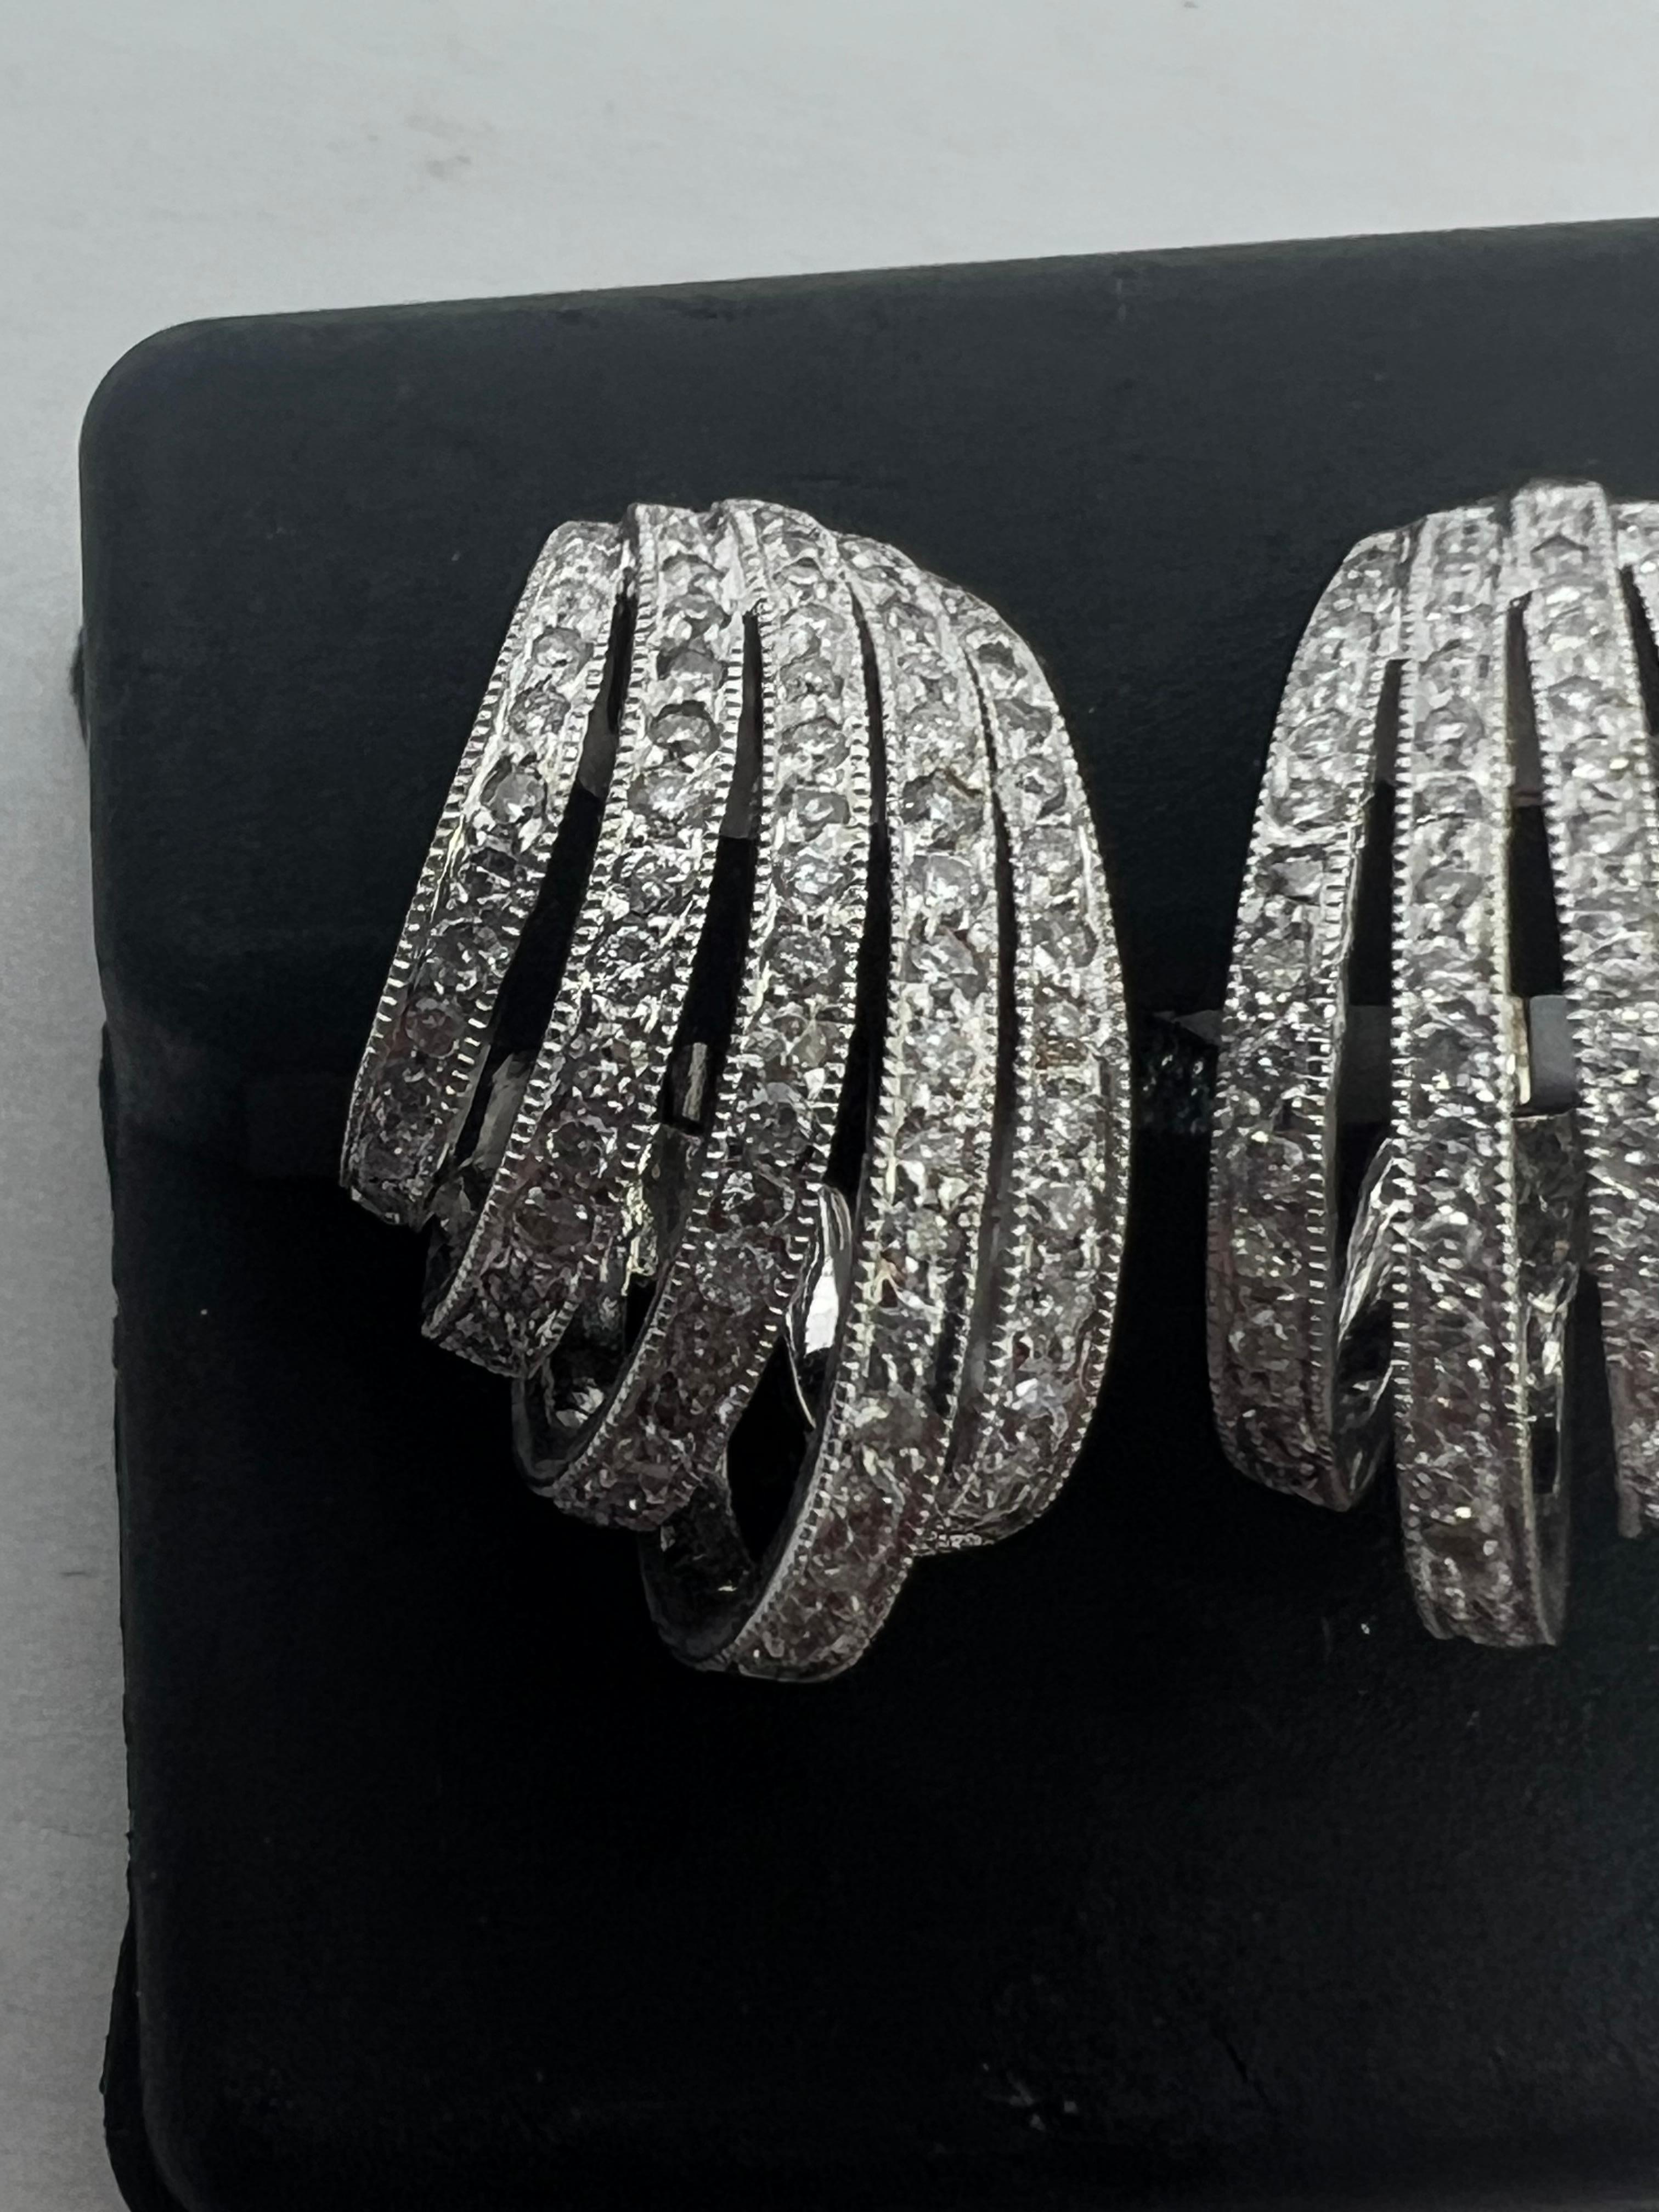 These stunning 14k white gold earrings feature a beautiful pavé setting, dangling from a leaver back shell design. The main stone is a natural round white diamond, set in a yellow gold metal. The earrings are perfect for any occasion and will add a